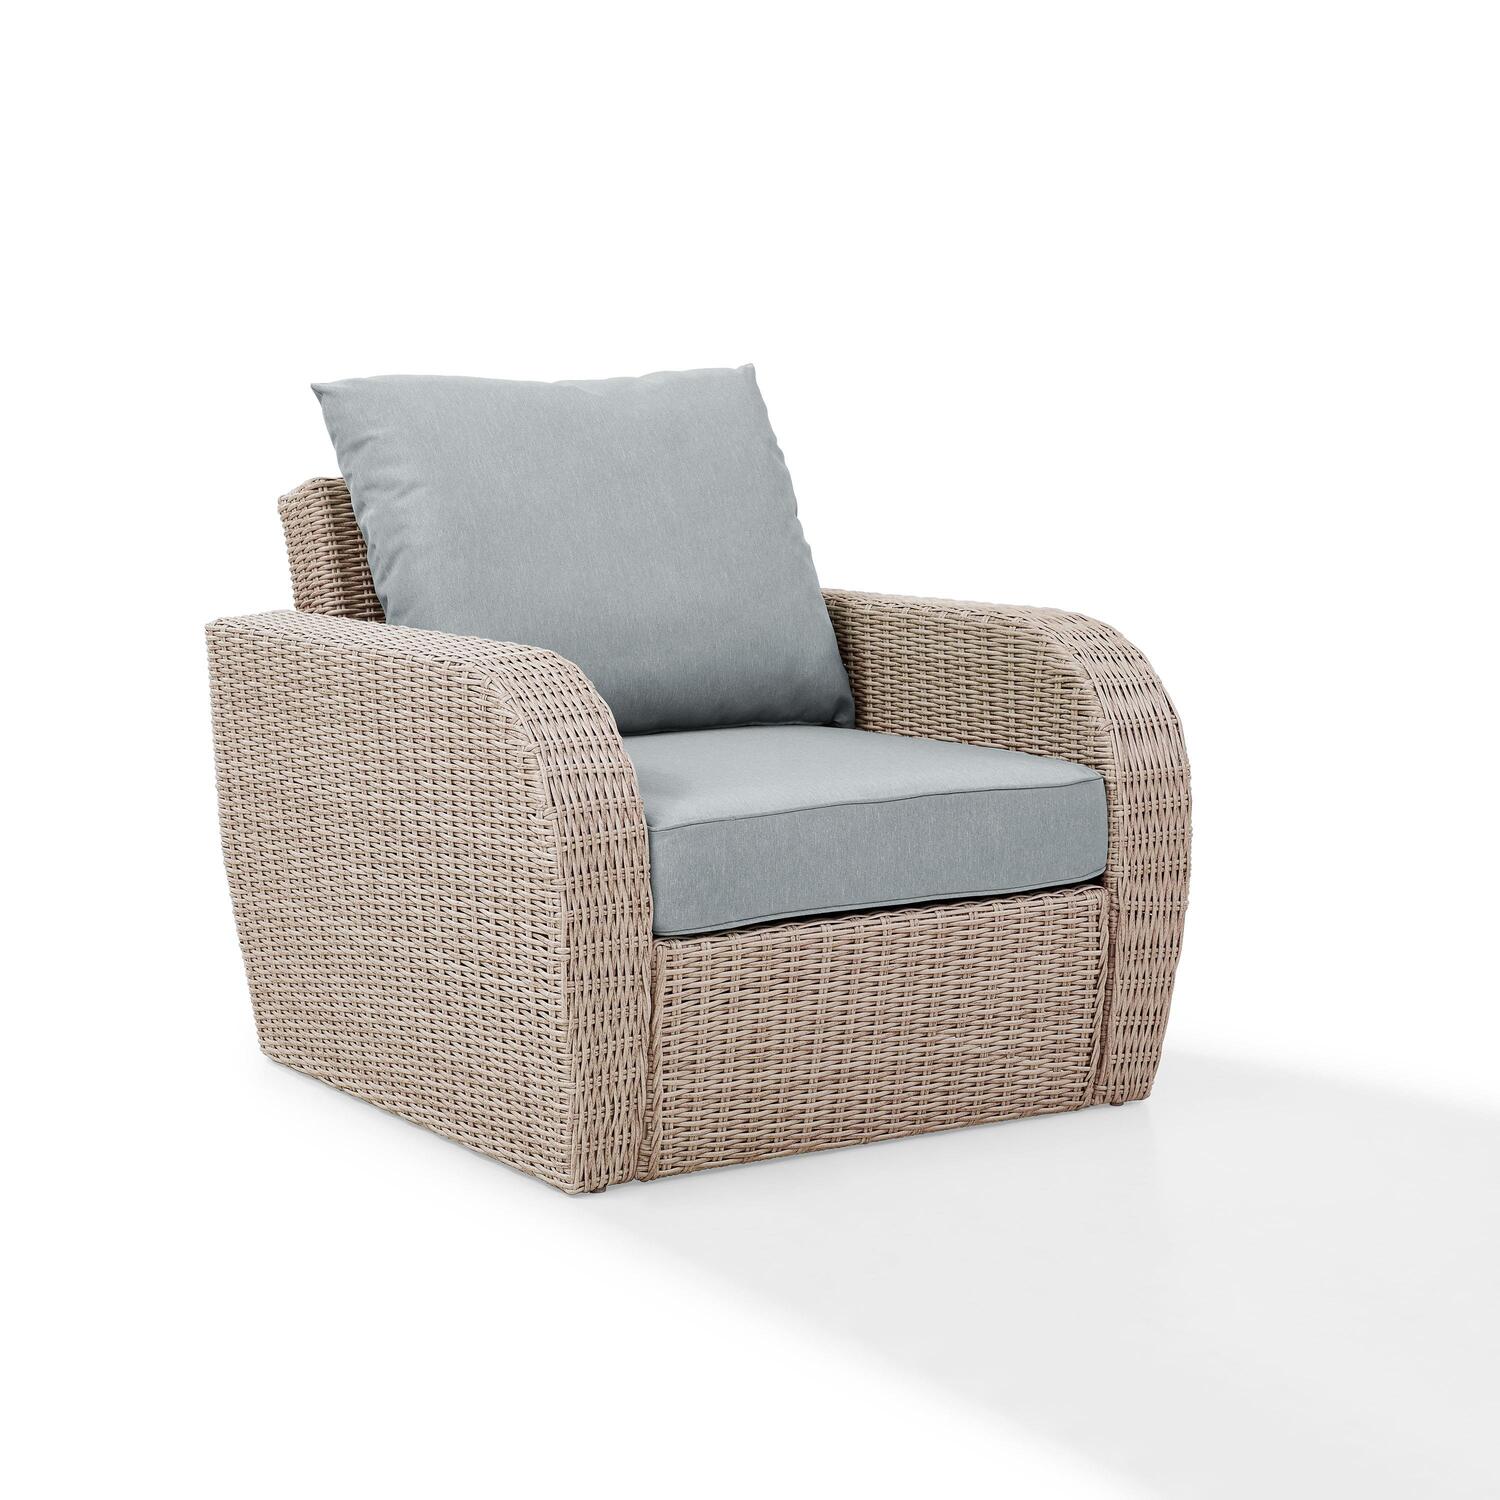 Crosley Furniture St Augustine Outdoor Wicker Arm Chair In Weathered White With Universal Mist Cushion - image 1 of 11